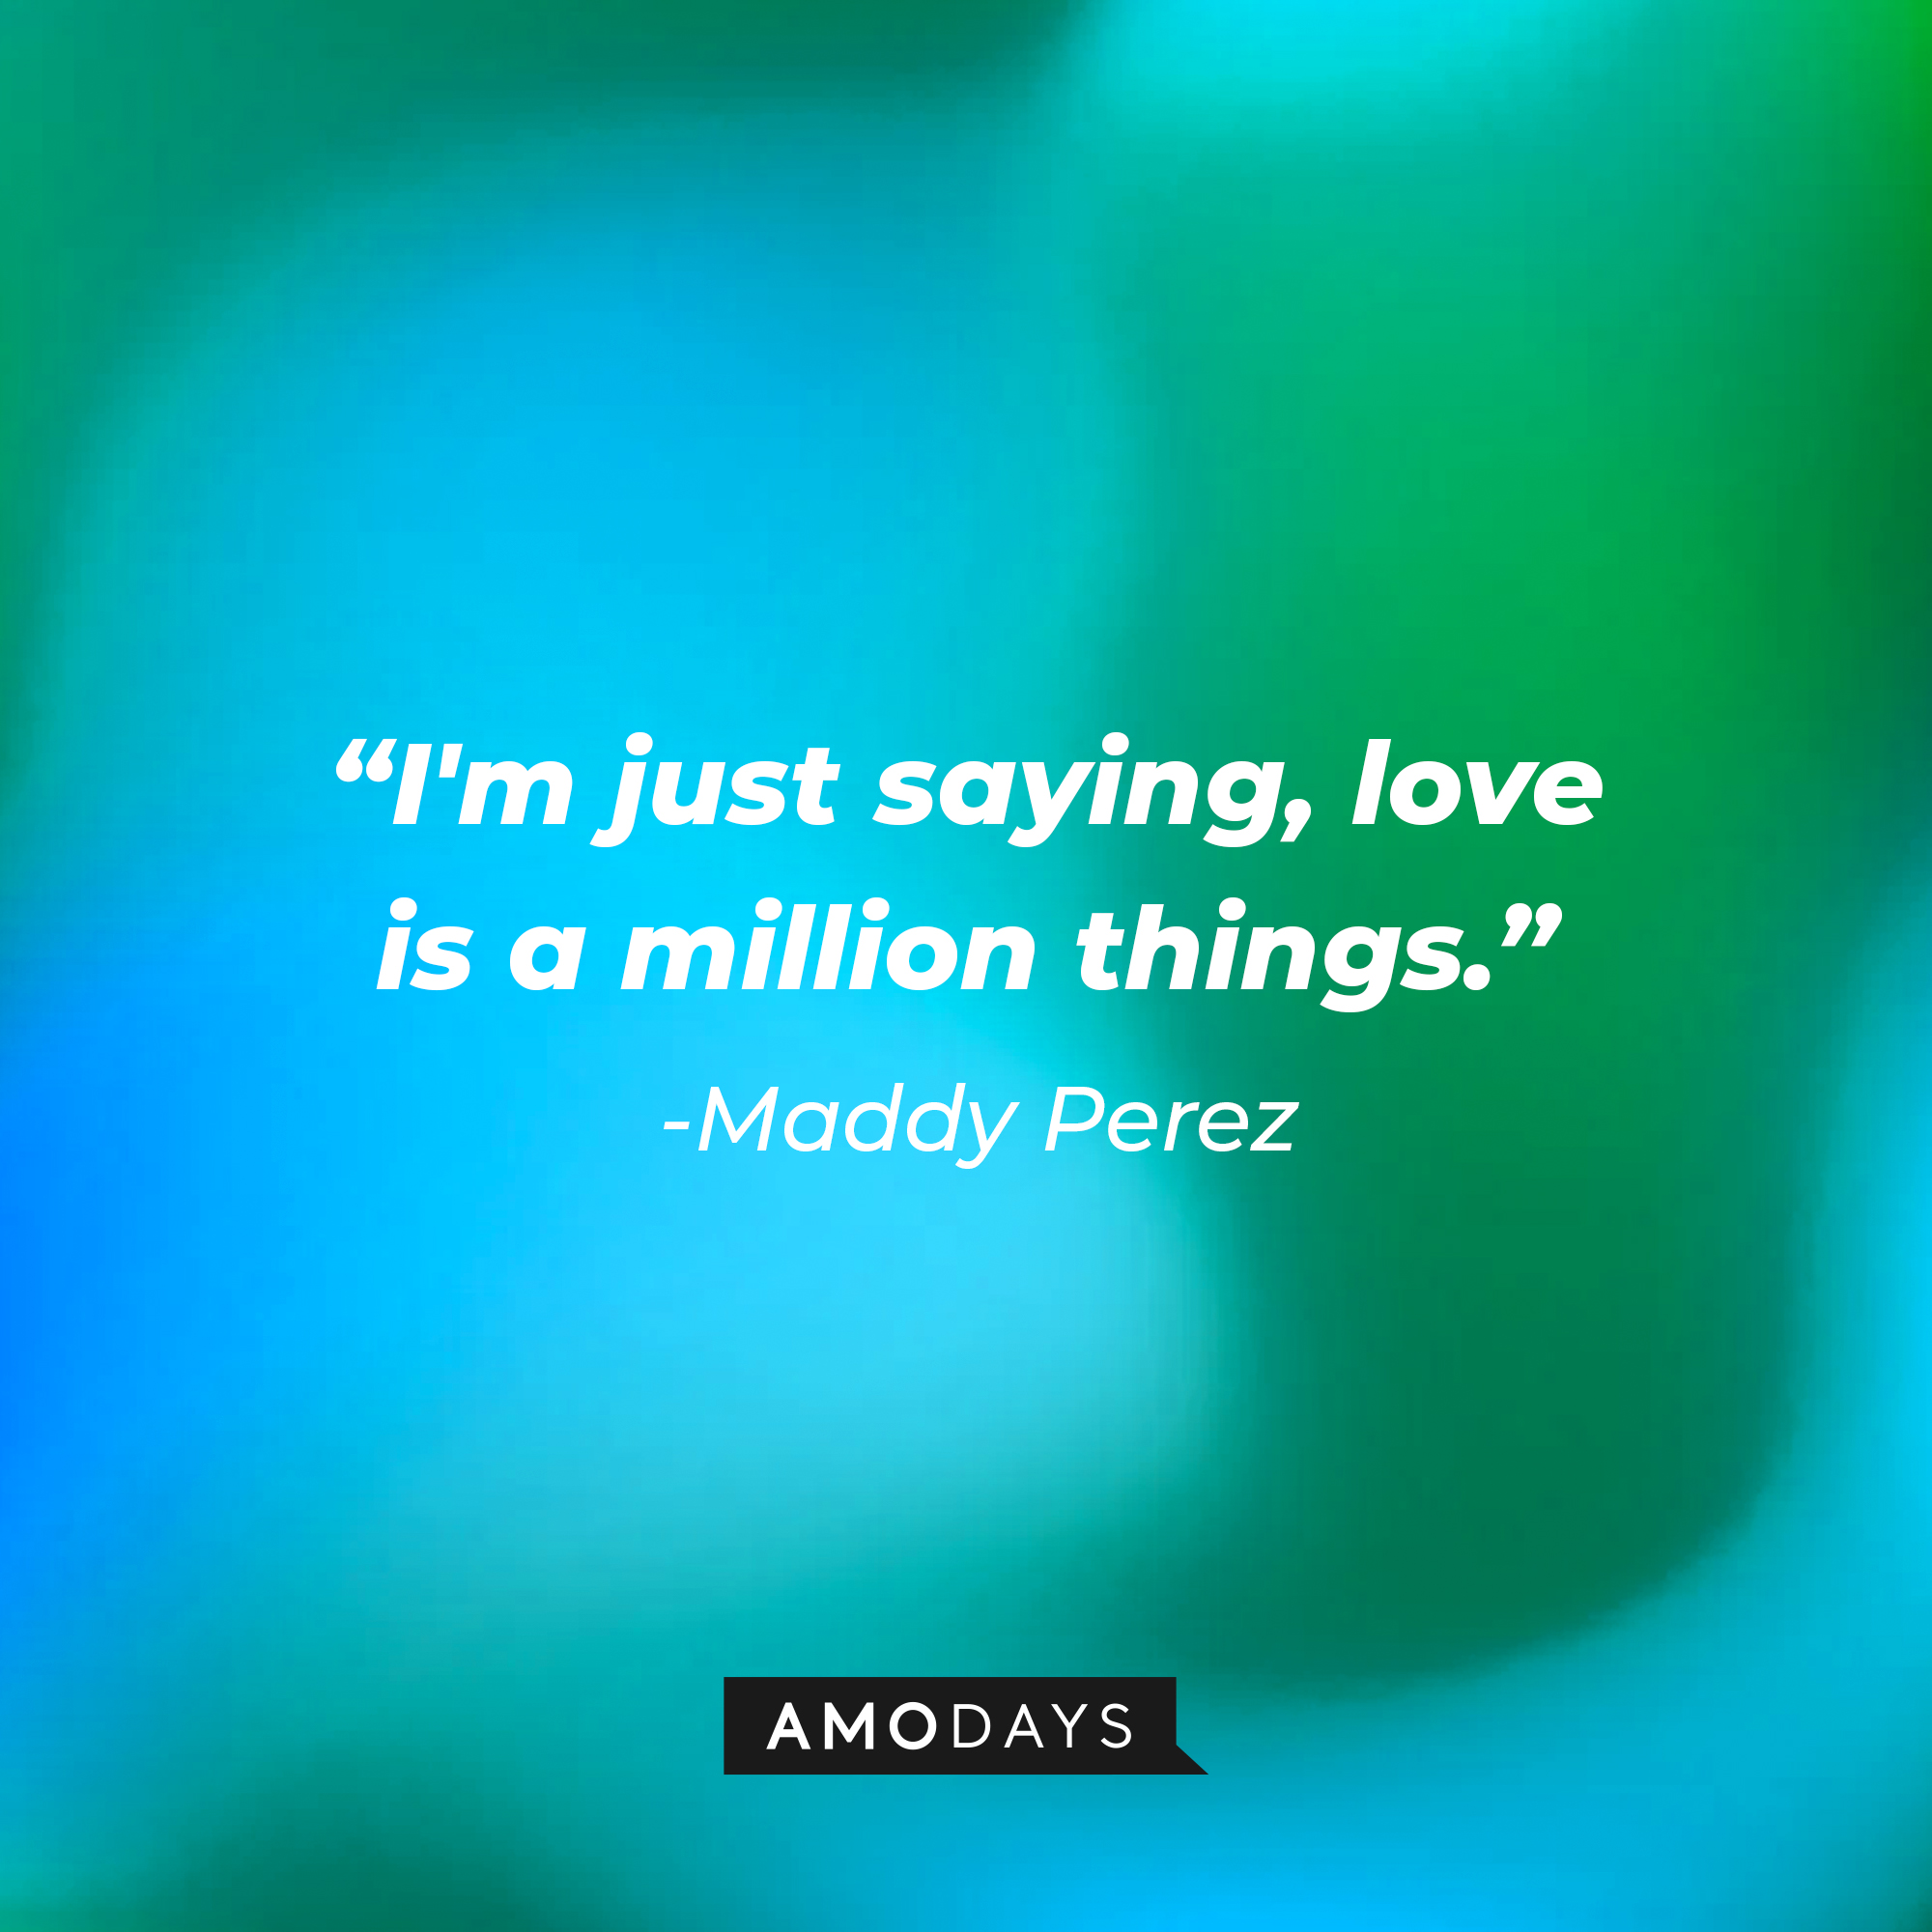 Maddy Perez’ quote: "I'm just saying, love is a million things.” | Source: AmoDays